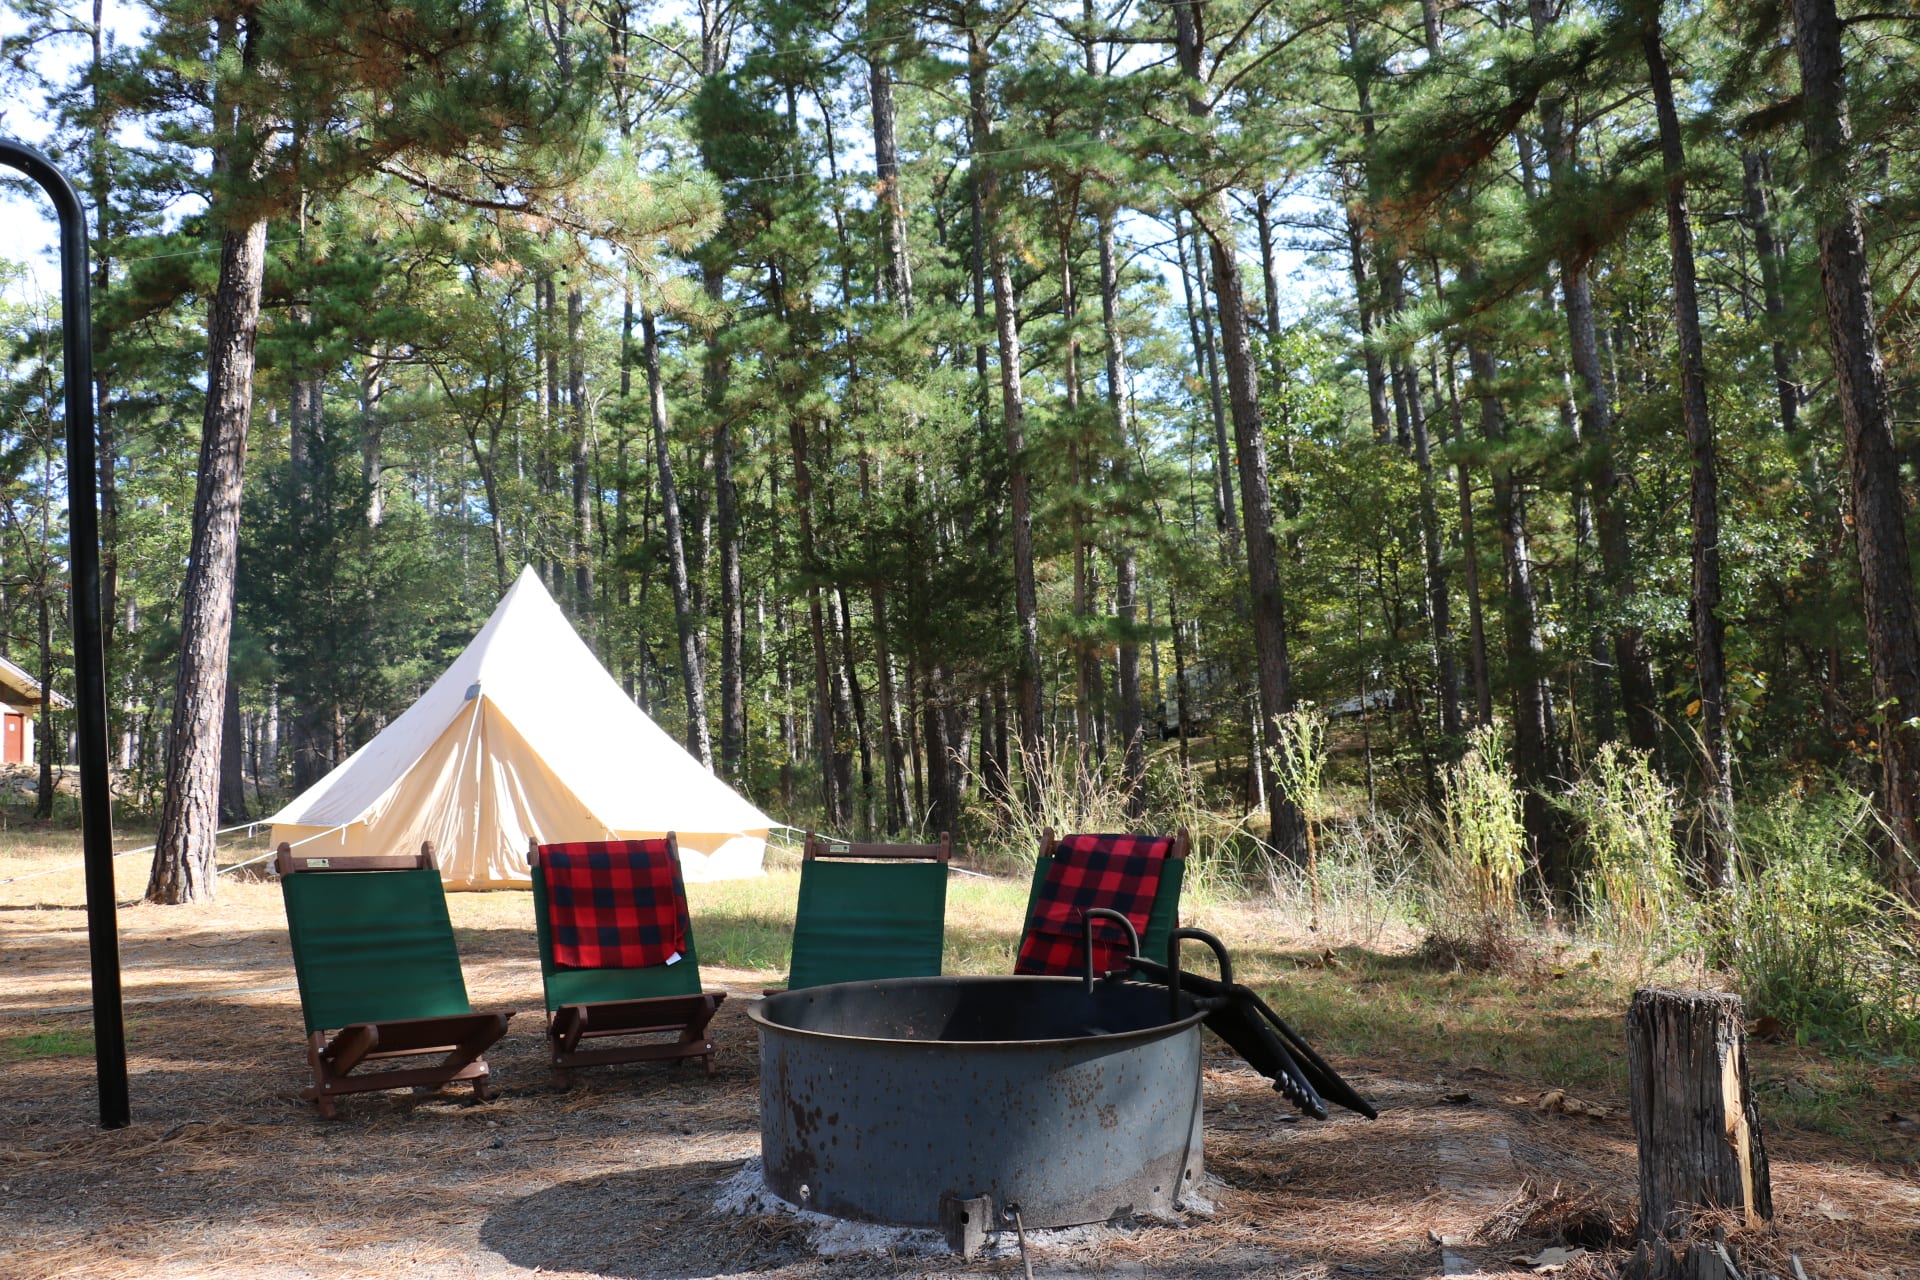 Spacious campsites surrounded by cedars.